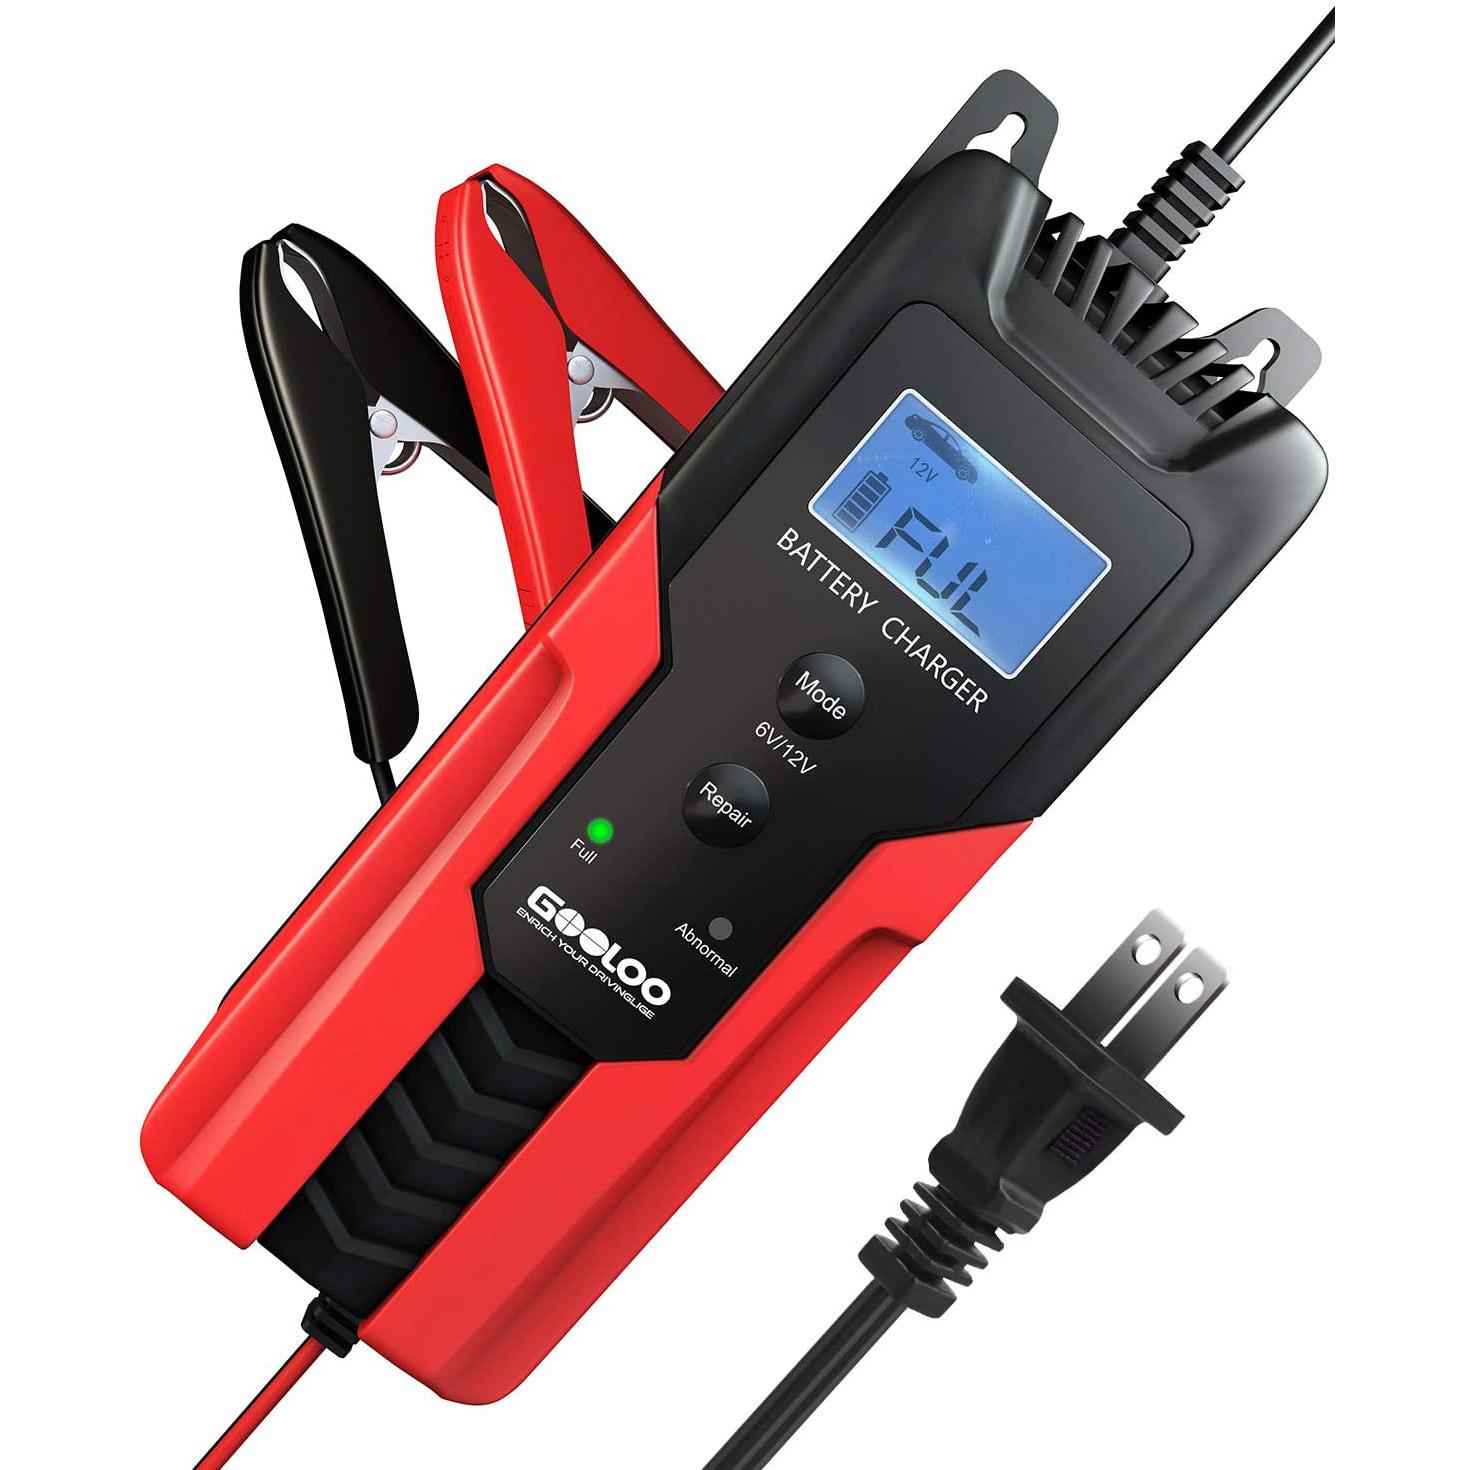 6V/12V Smart Battery Charger and Battery Maintainer for $19.97 Shipped